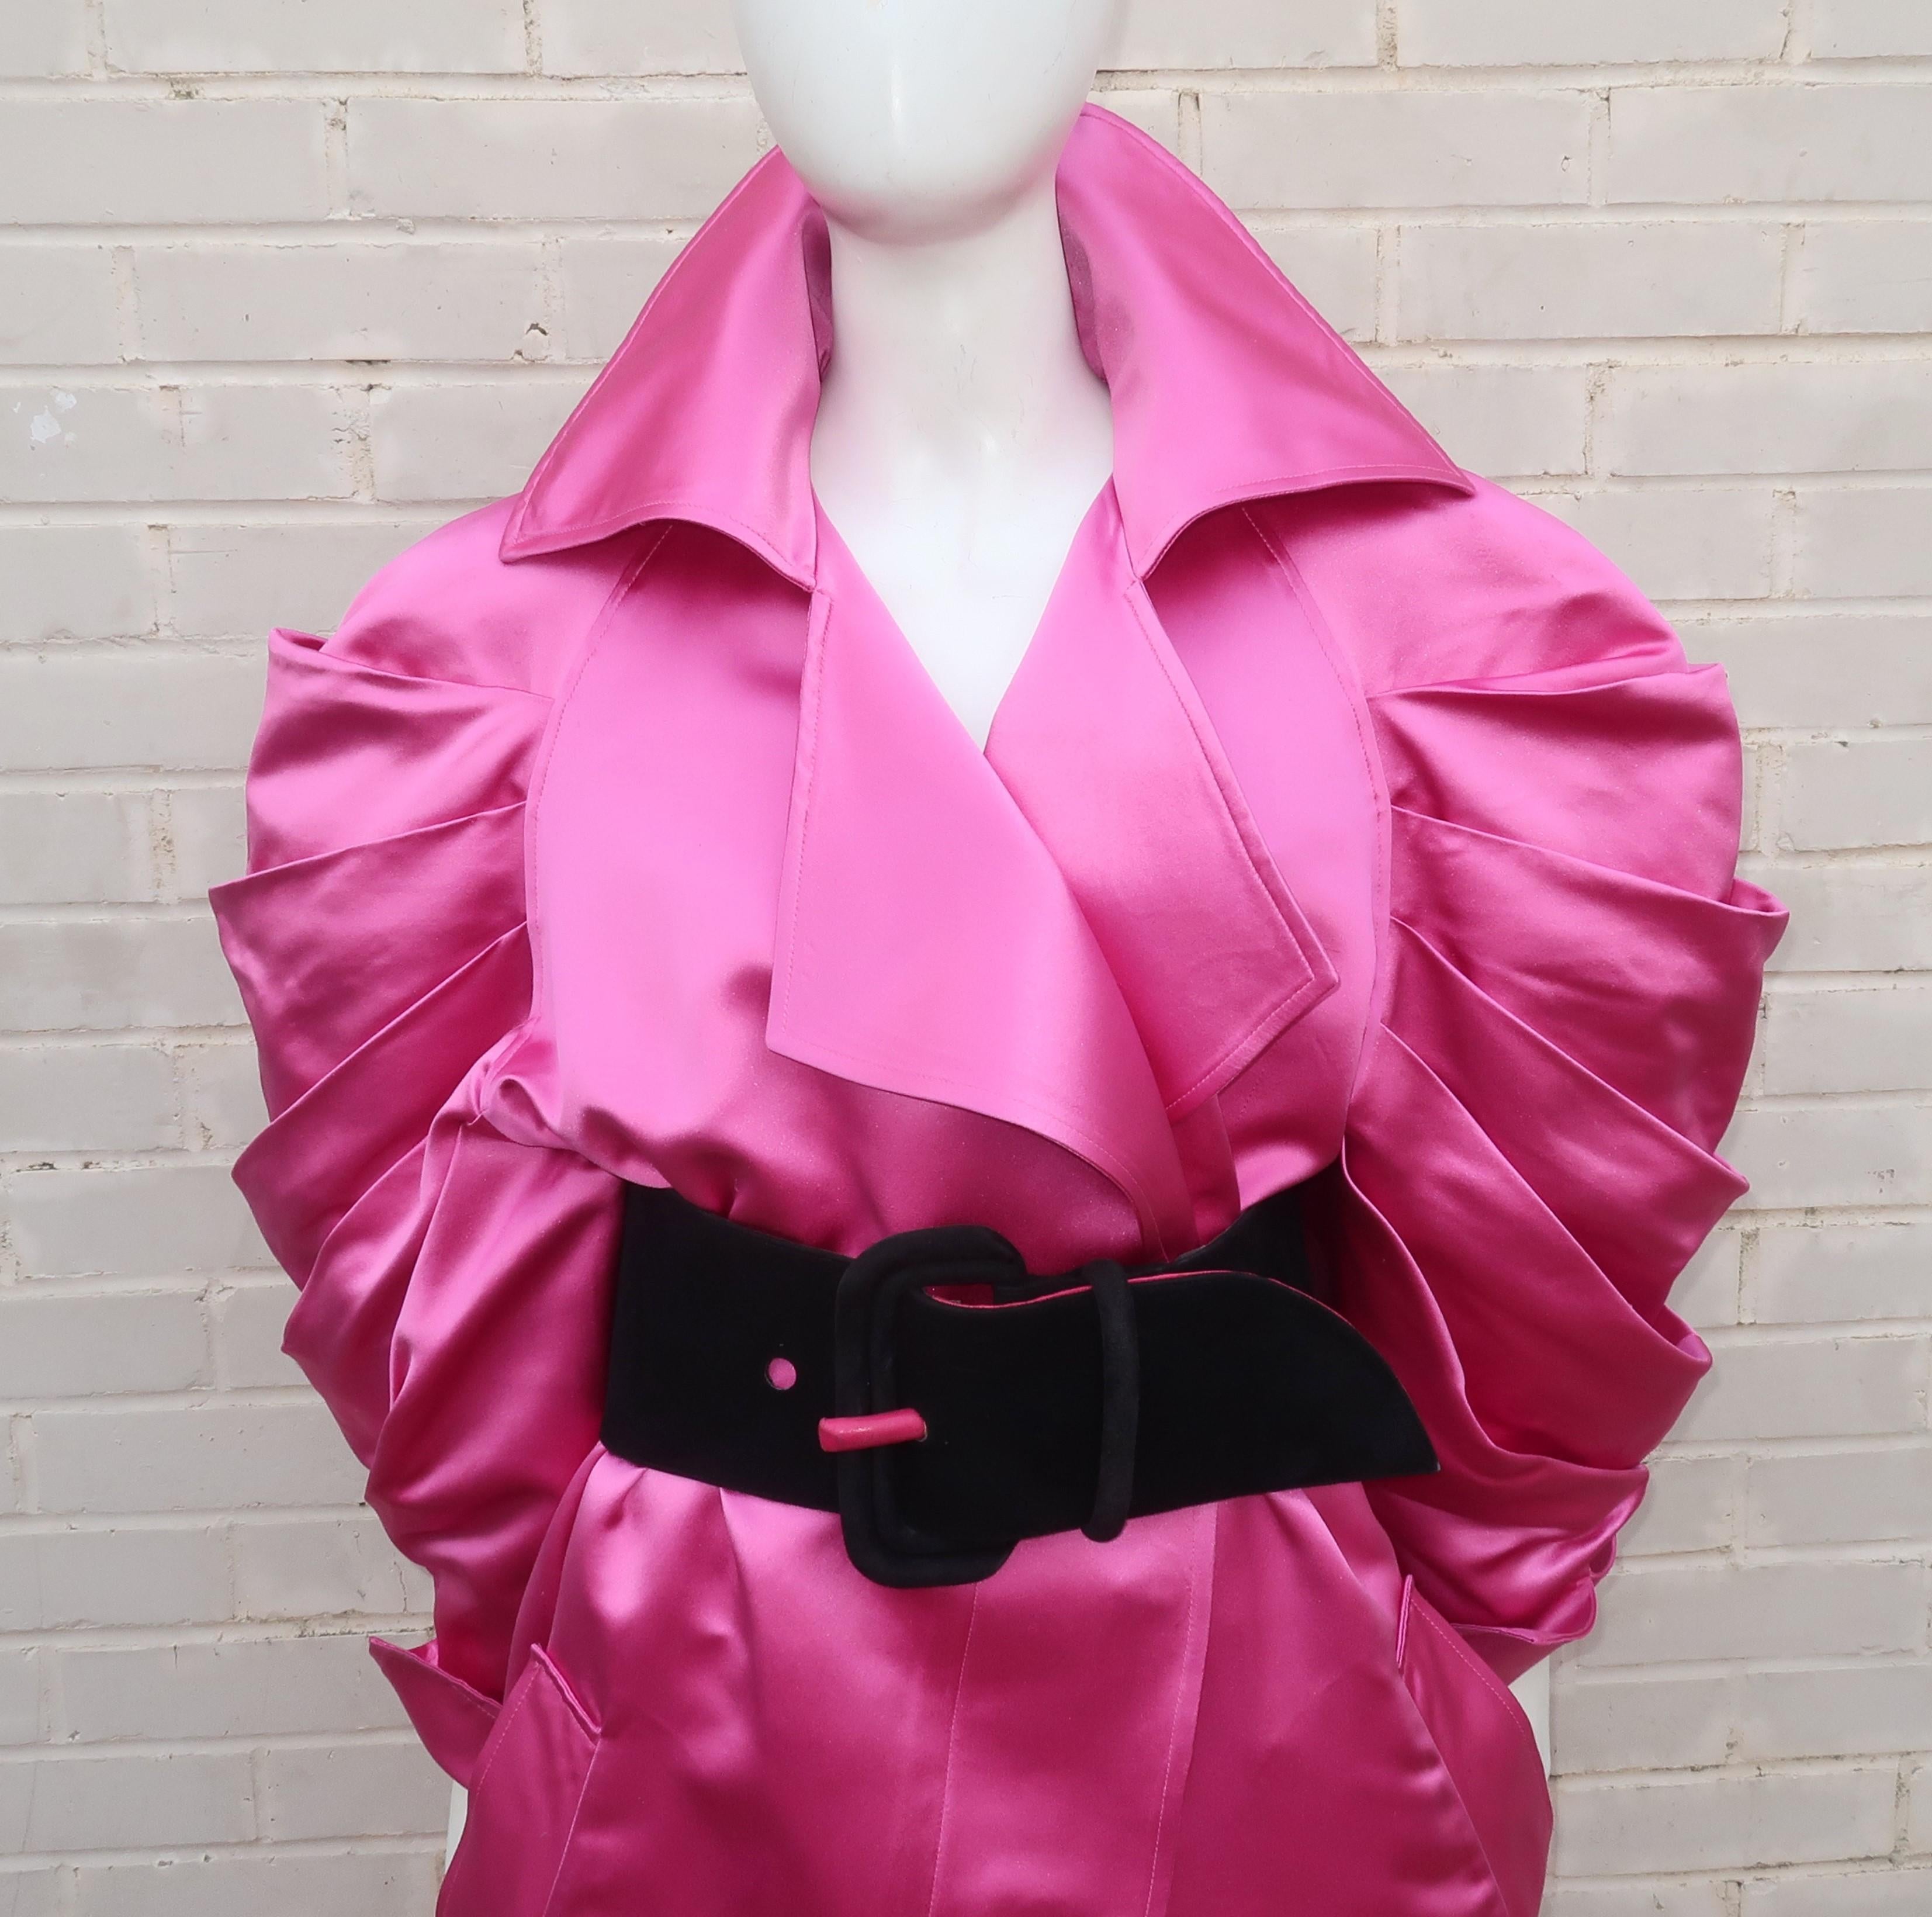 Claude Montana’s strong silhouettes epitomizes 1980’s style with sculptural shapes and high quality construction.  This hot pink silk satin coat is a wonderful example of his work.  The coat buttons at the front with a hidden panel and sports ruched